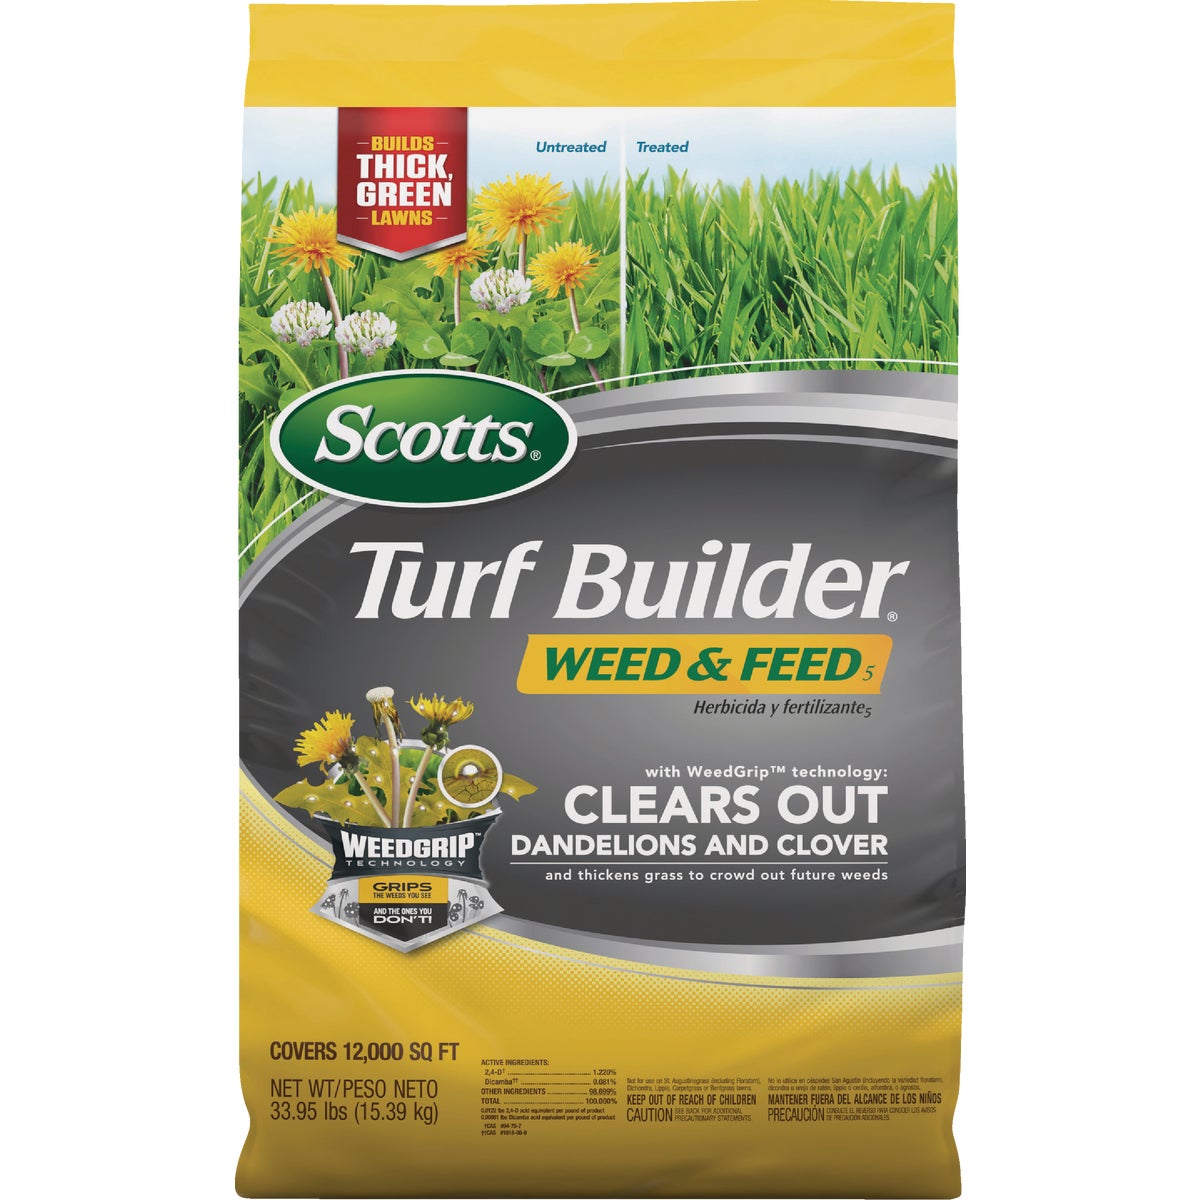 Scotts Turf Builder Weed & Feed5, 12,000 Sq. ft., 33.95 lbs. - image 1 of 7